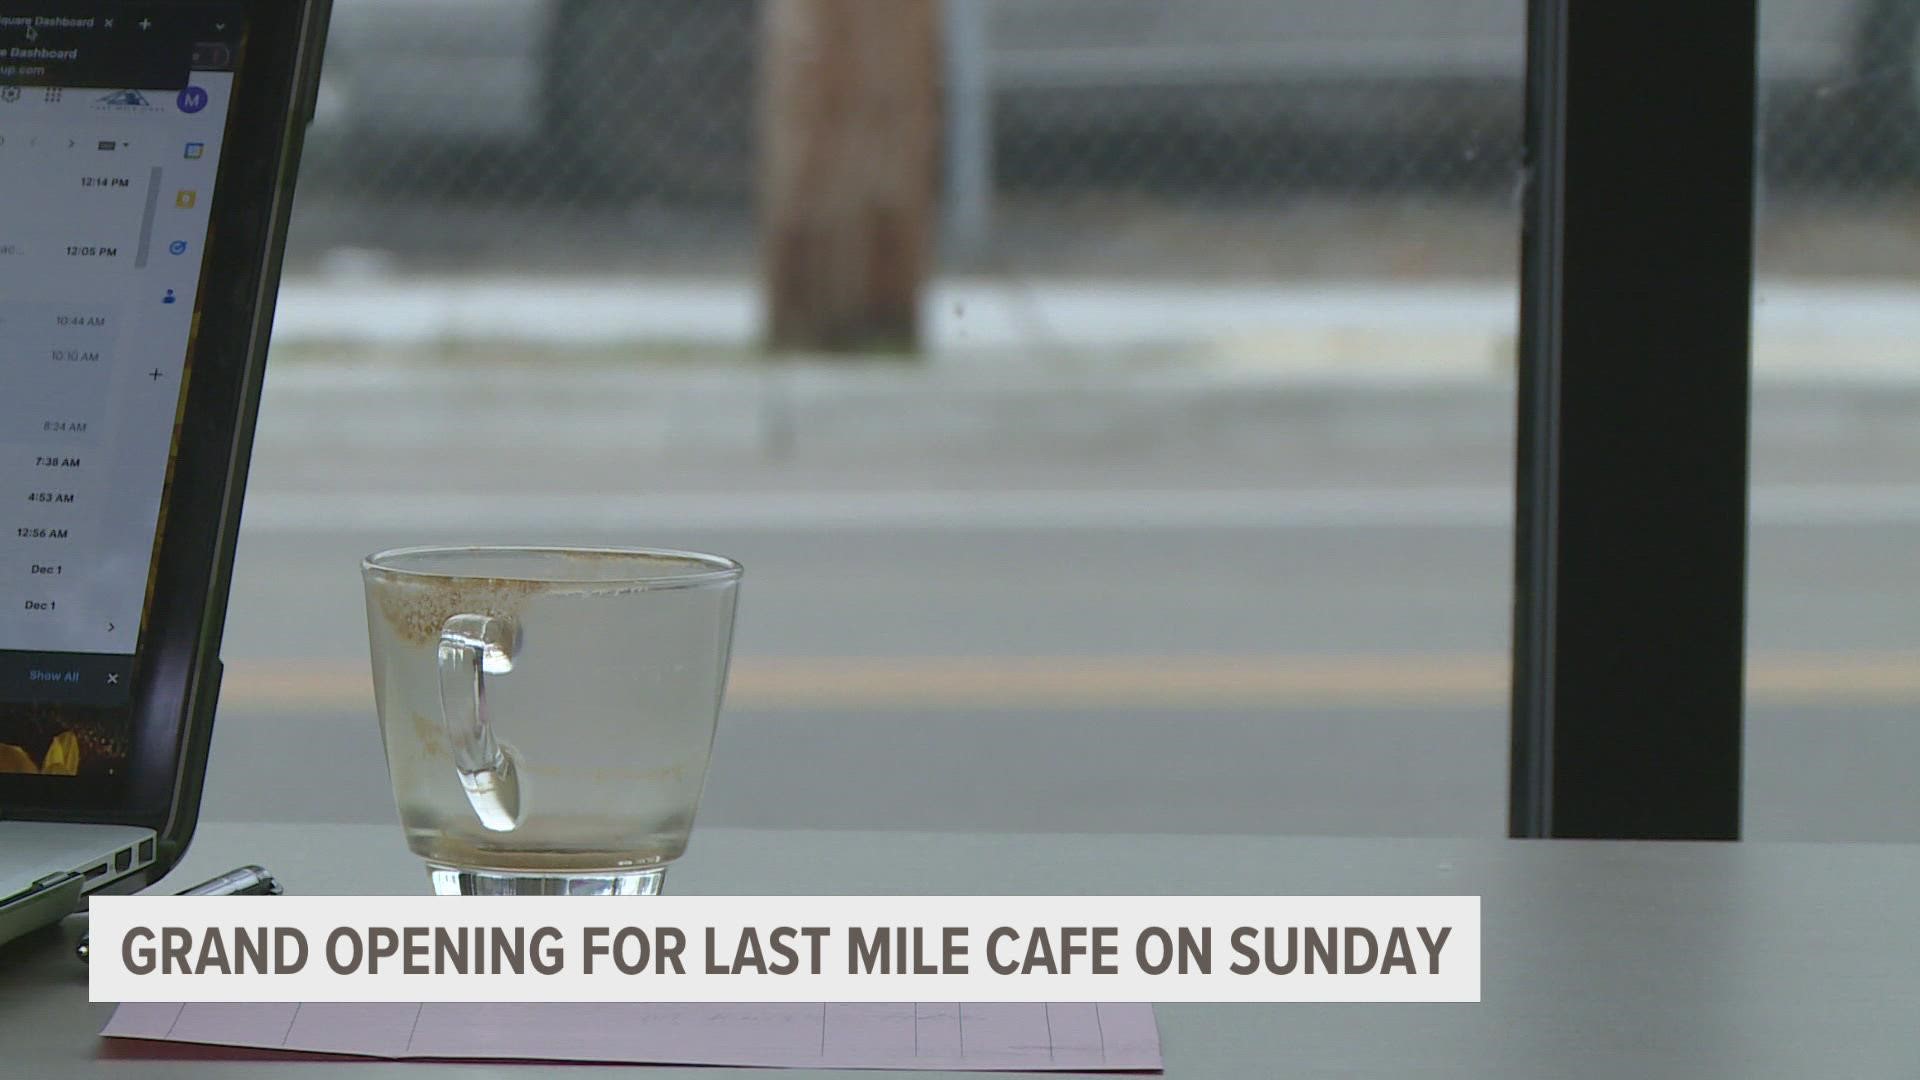 Last Mile Cafe donates 10% of all revenue to charity and to date has already donated more than $10,000 to local non-profits.